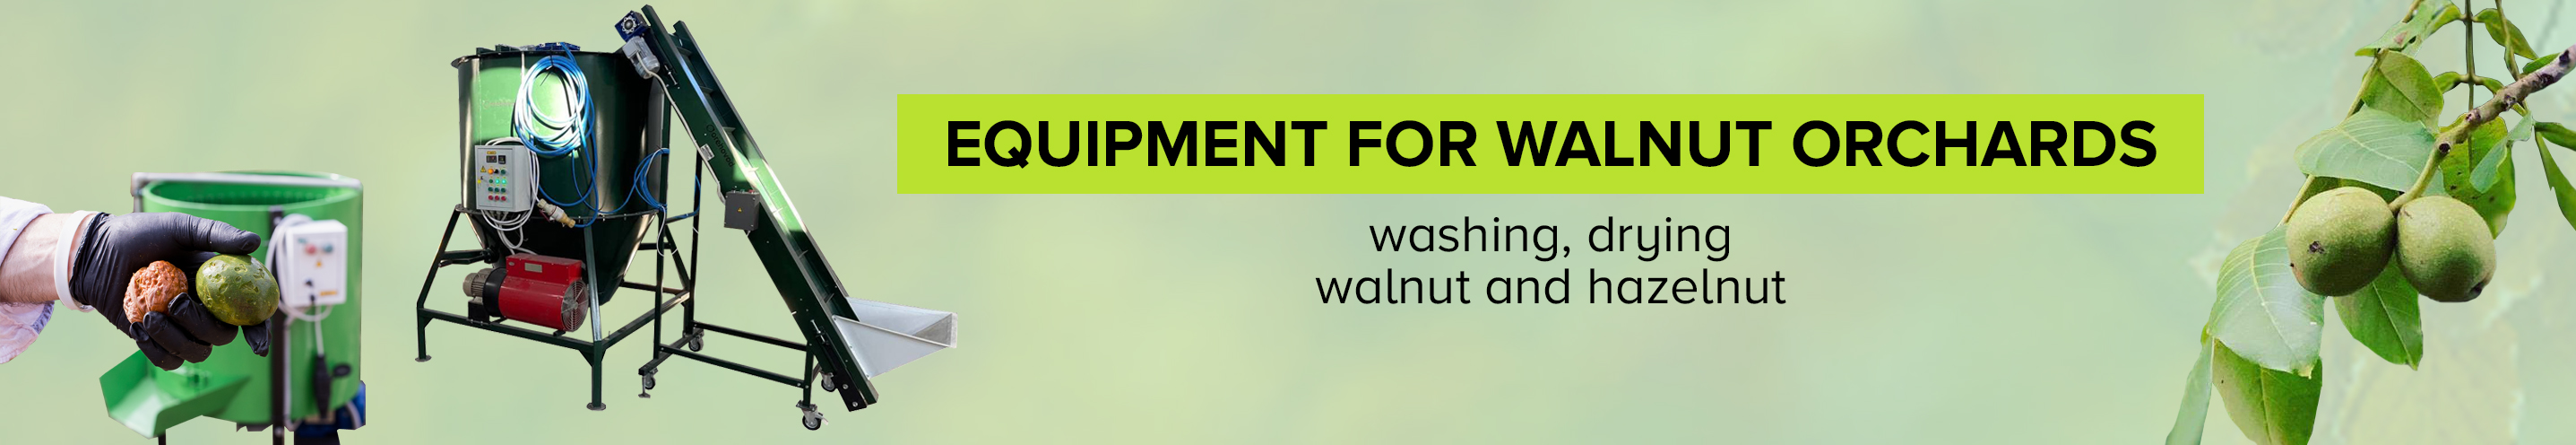 Equipment for walnut orchards for washing and drying walnuts